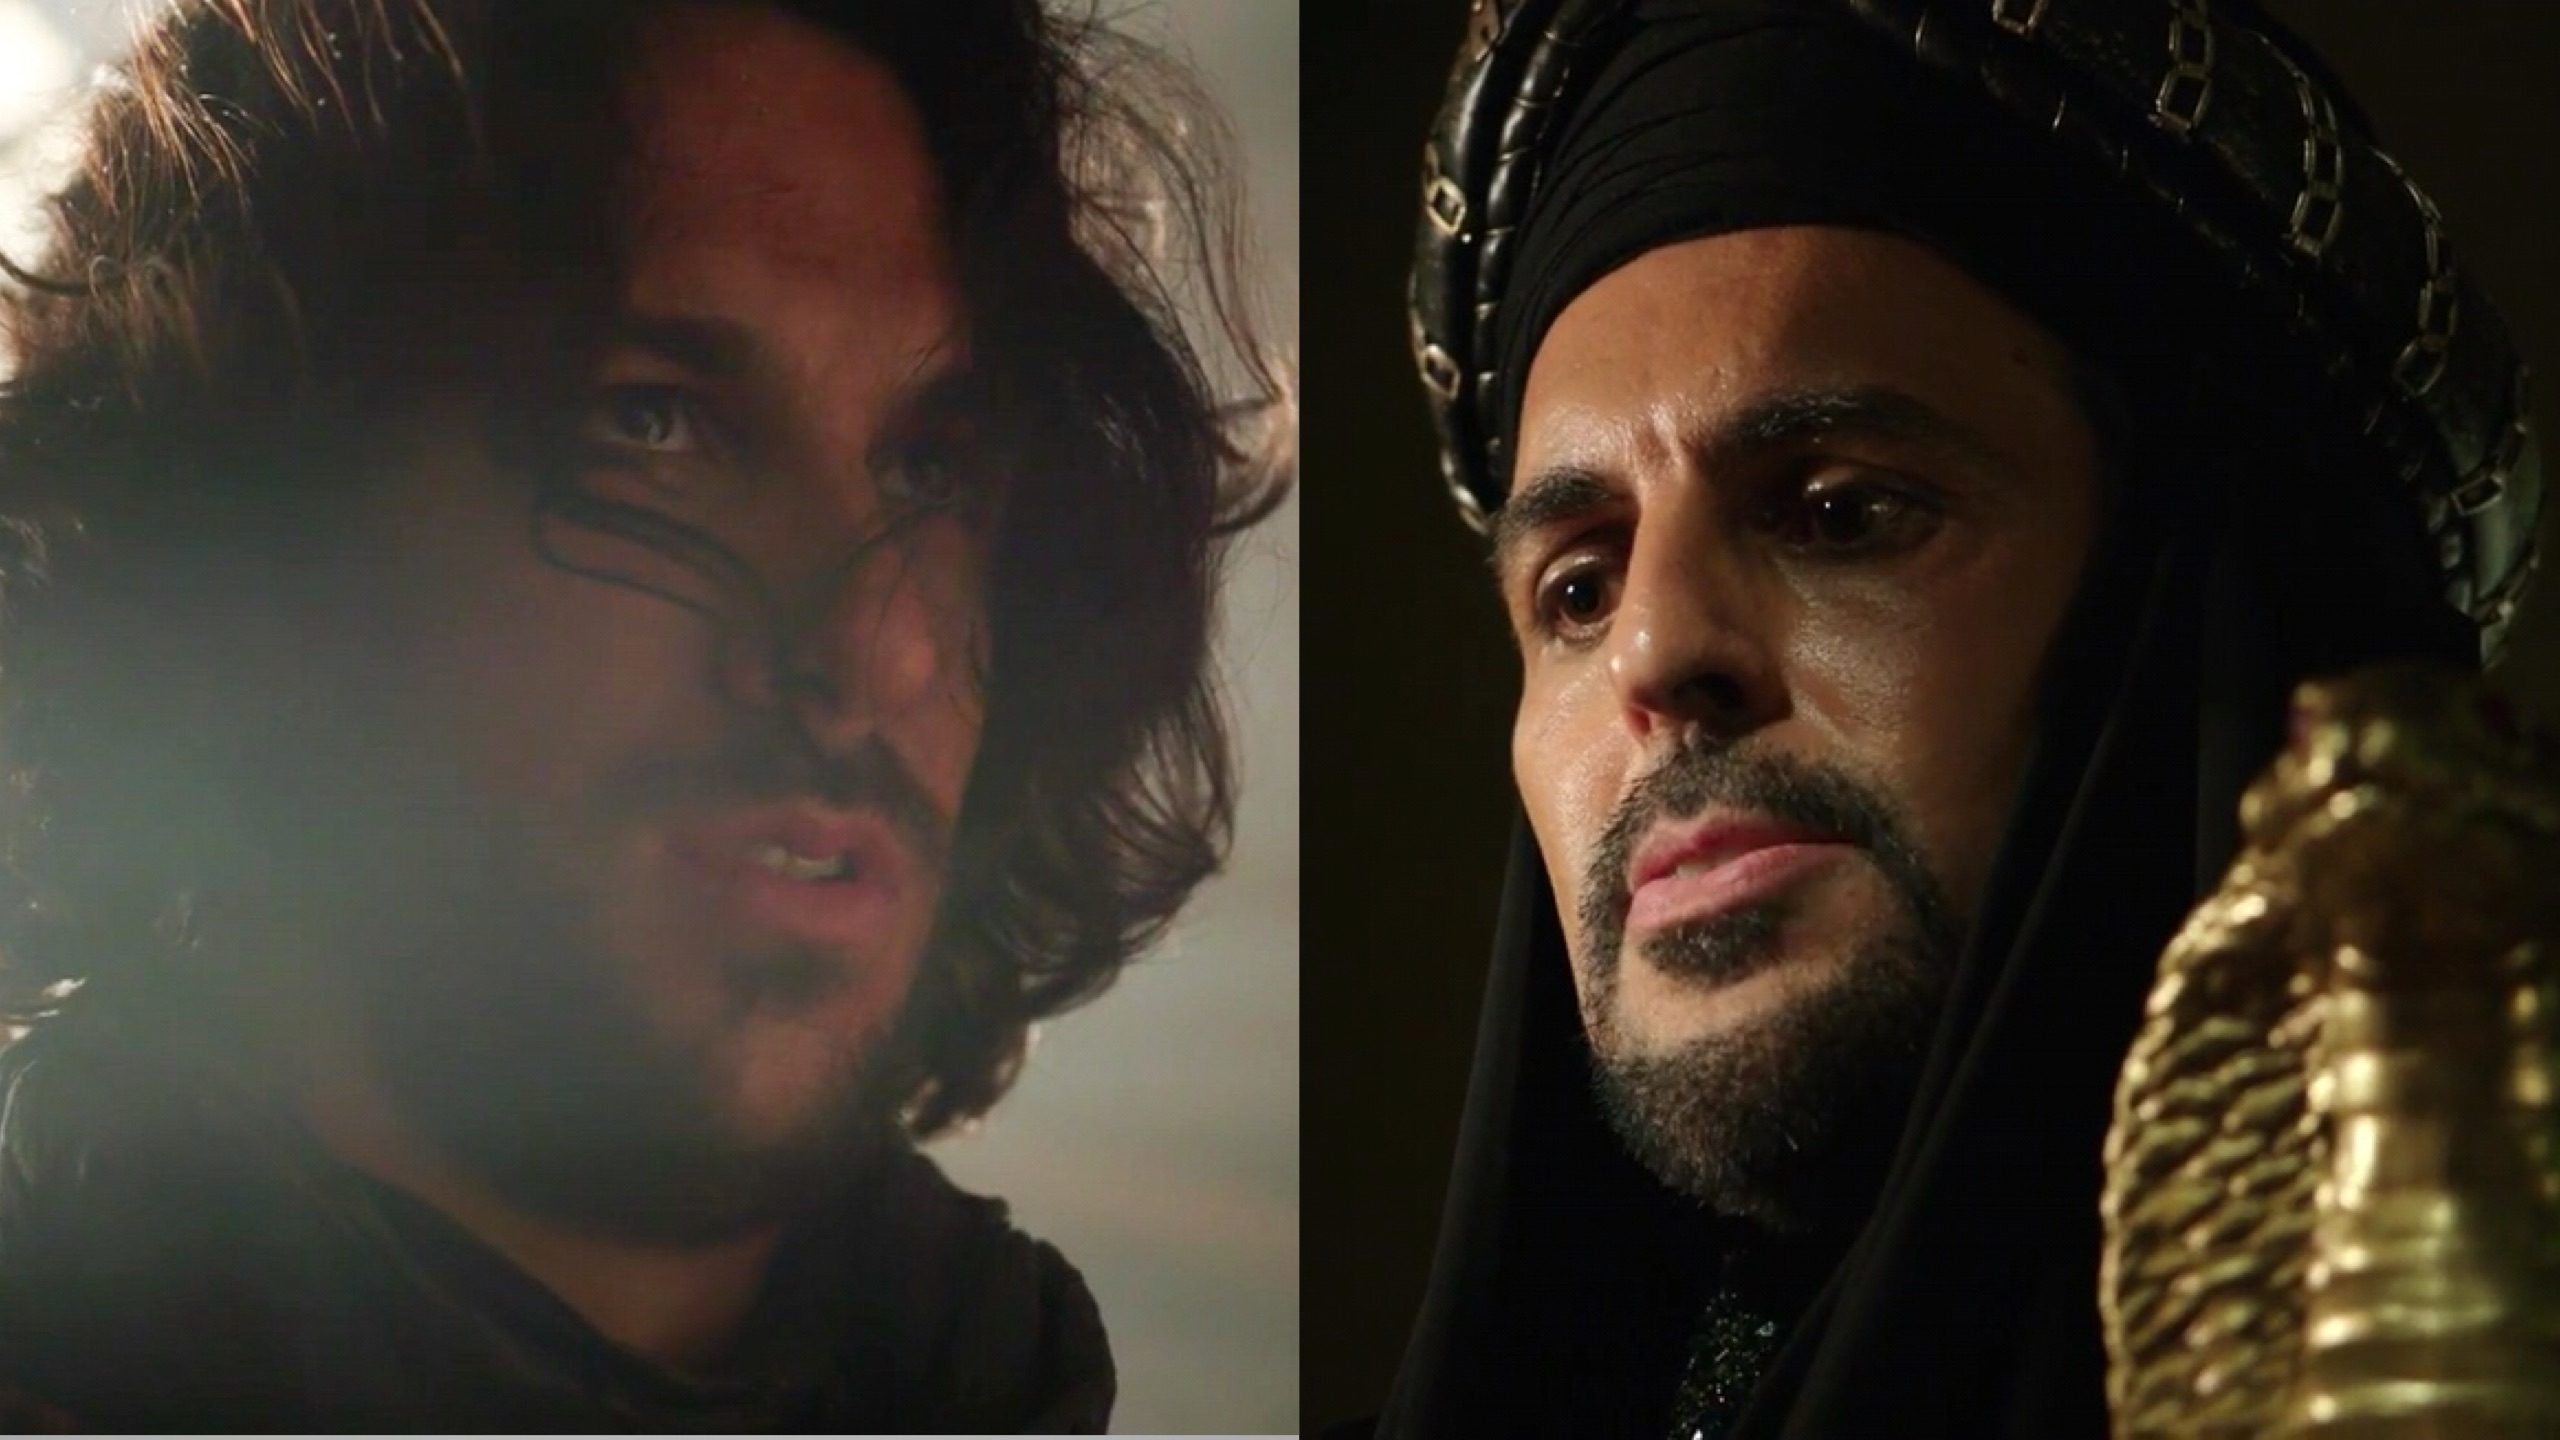 WATCH: ‘Once Upon A Time’ season 6 features Aladdin, Jafar in new clip